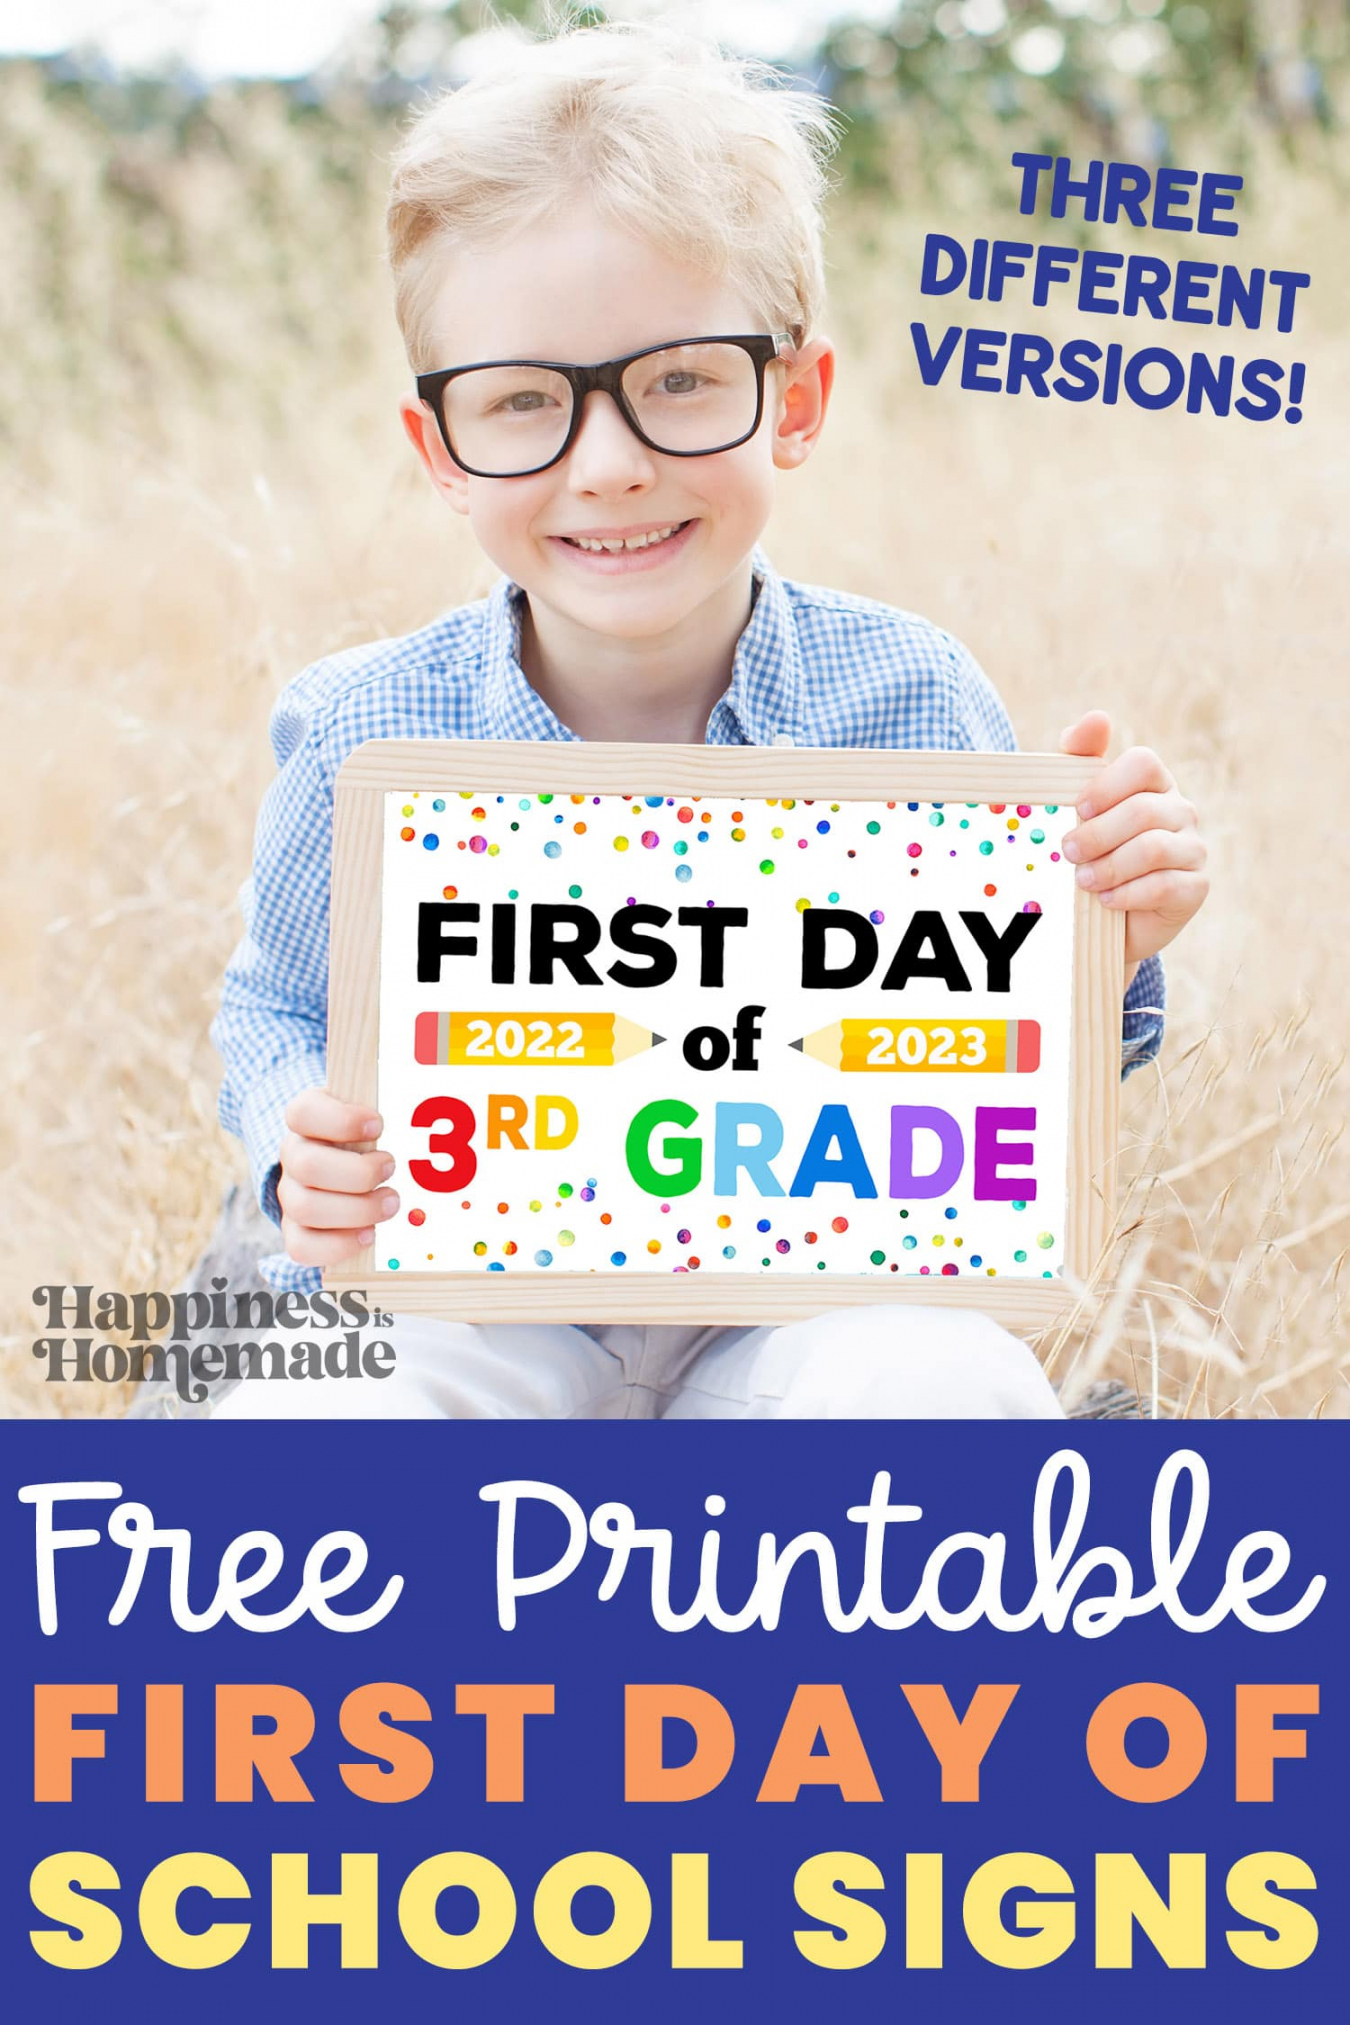 Free Printable First Day of School Signs - - Happiness is  - FREE Printables - First Day Of School Sign Printable Free